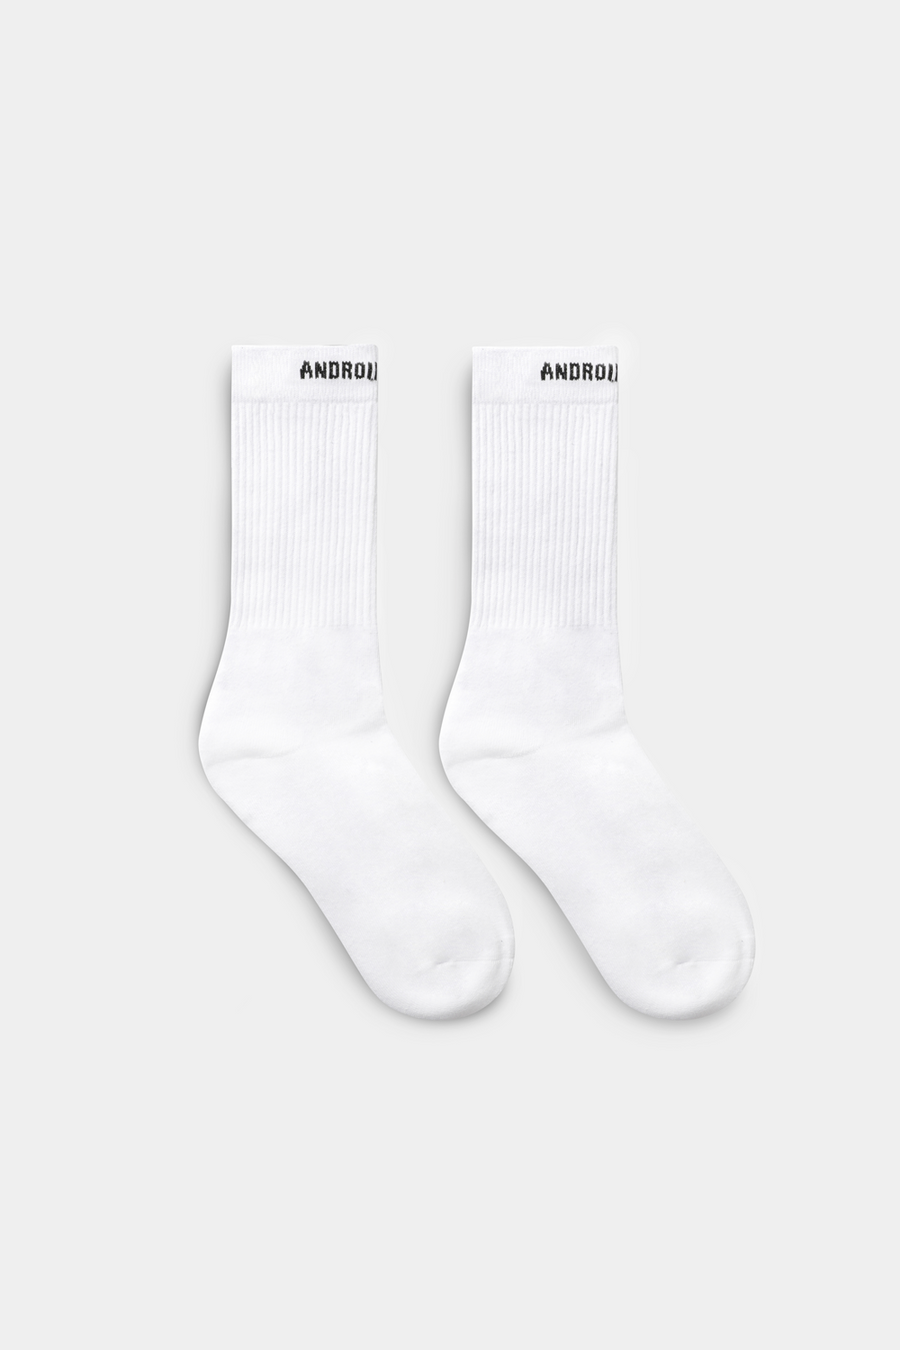 Buy the Android Homme AH Crew Sock in White at Intro. Spend £50 for free UK delivery. Official stockists. We ship worldwide.